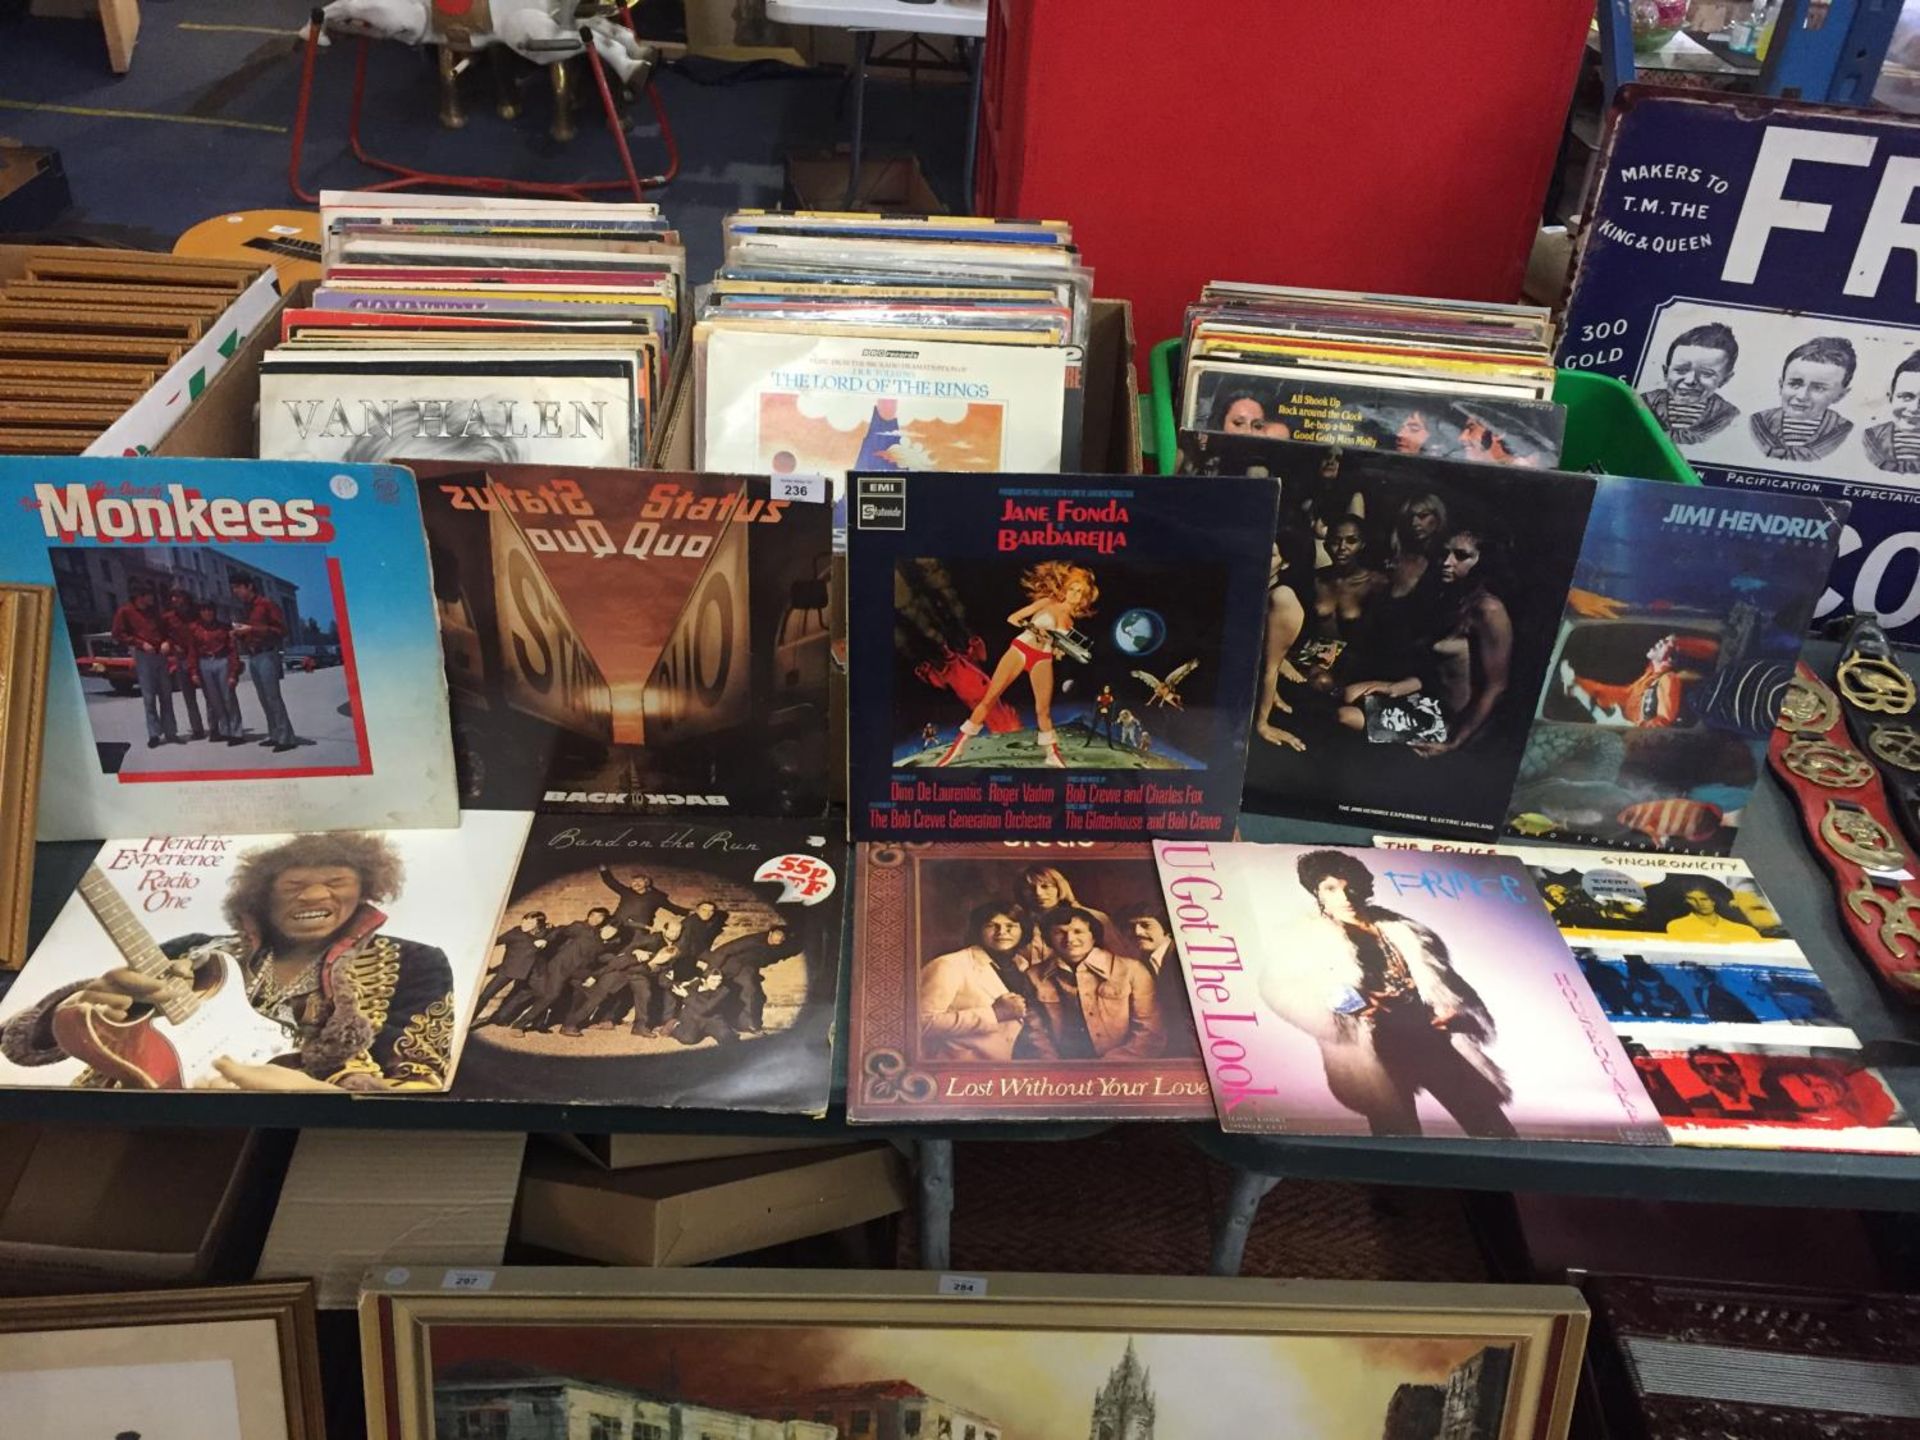 A LARGE COLLECTIONS OF LP'S